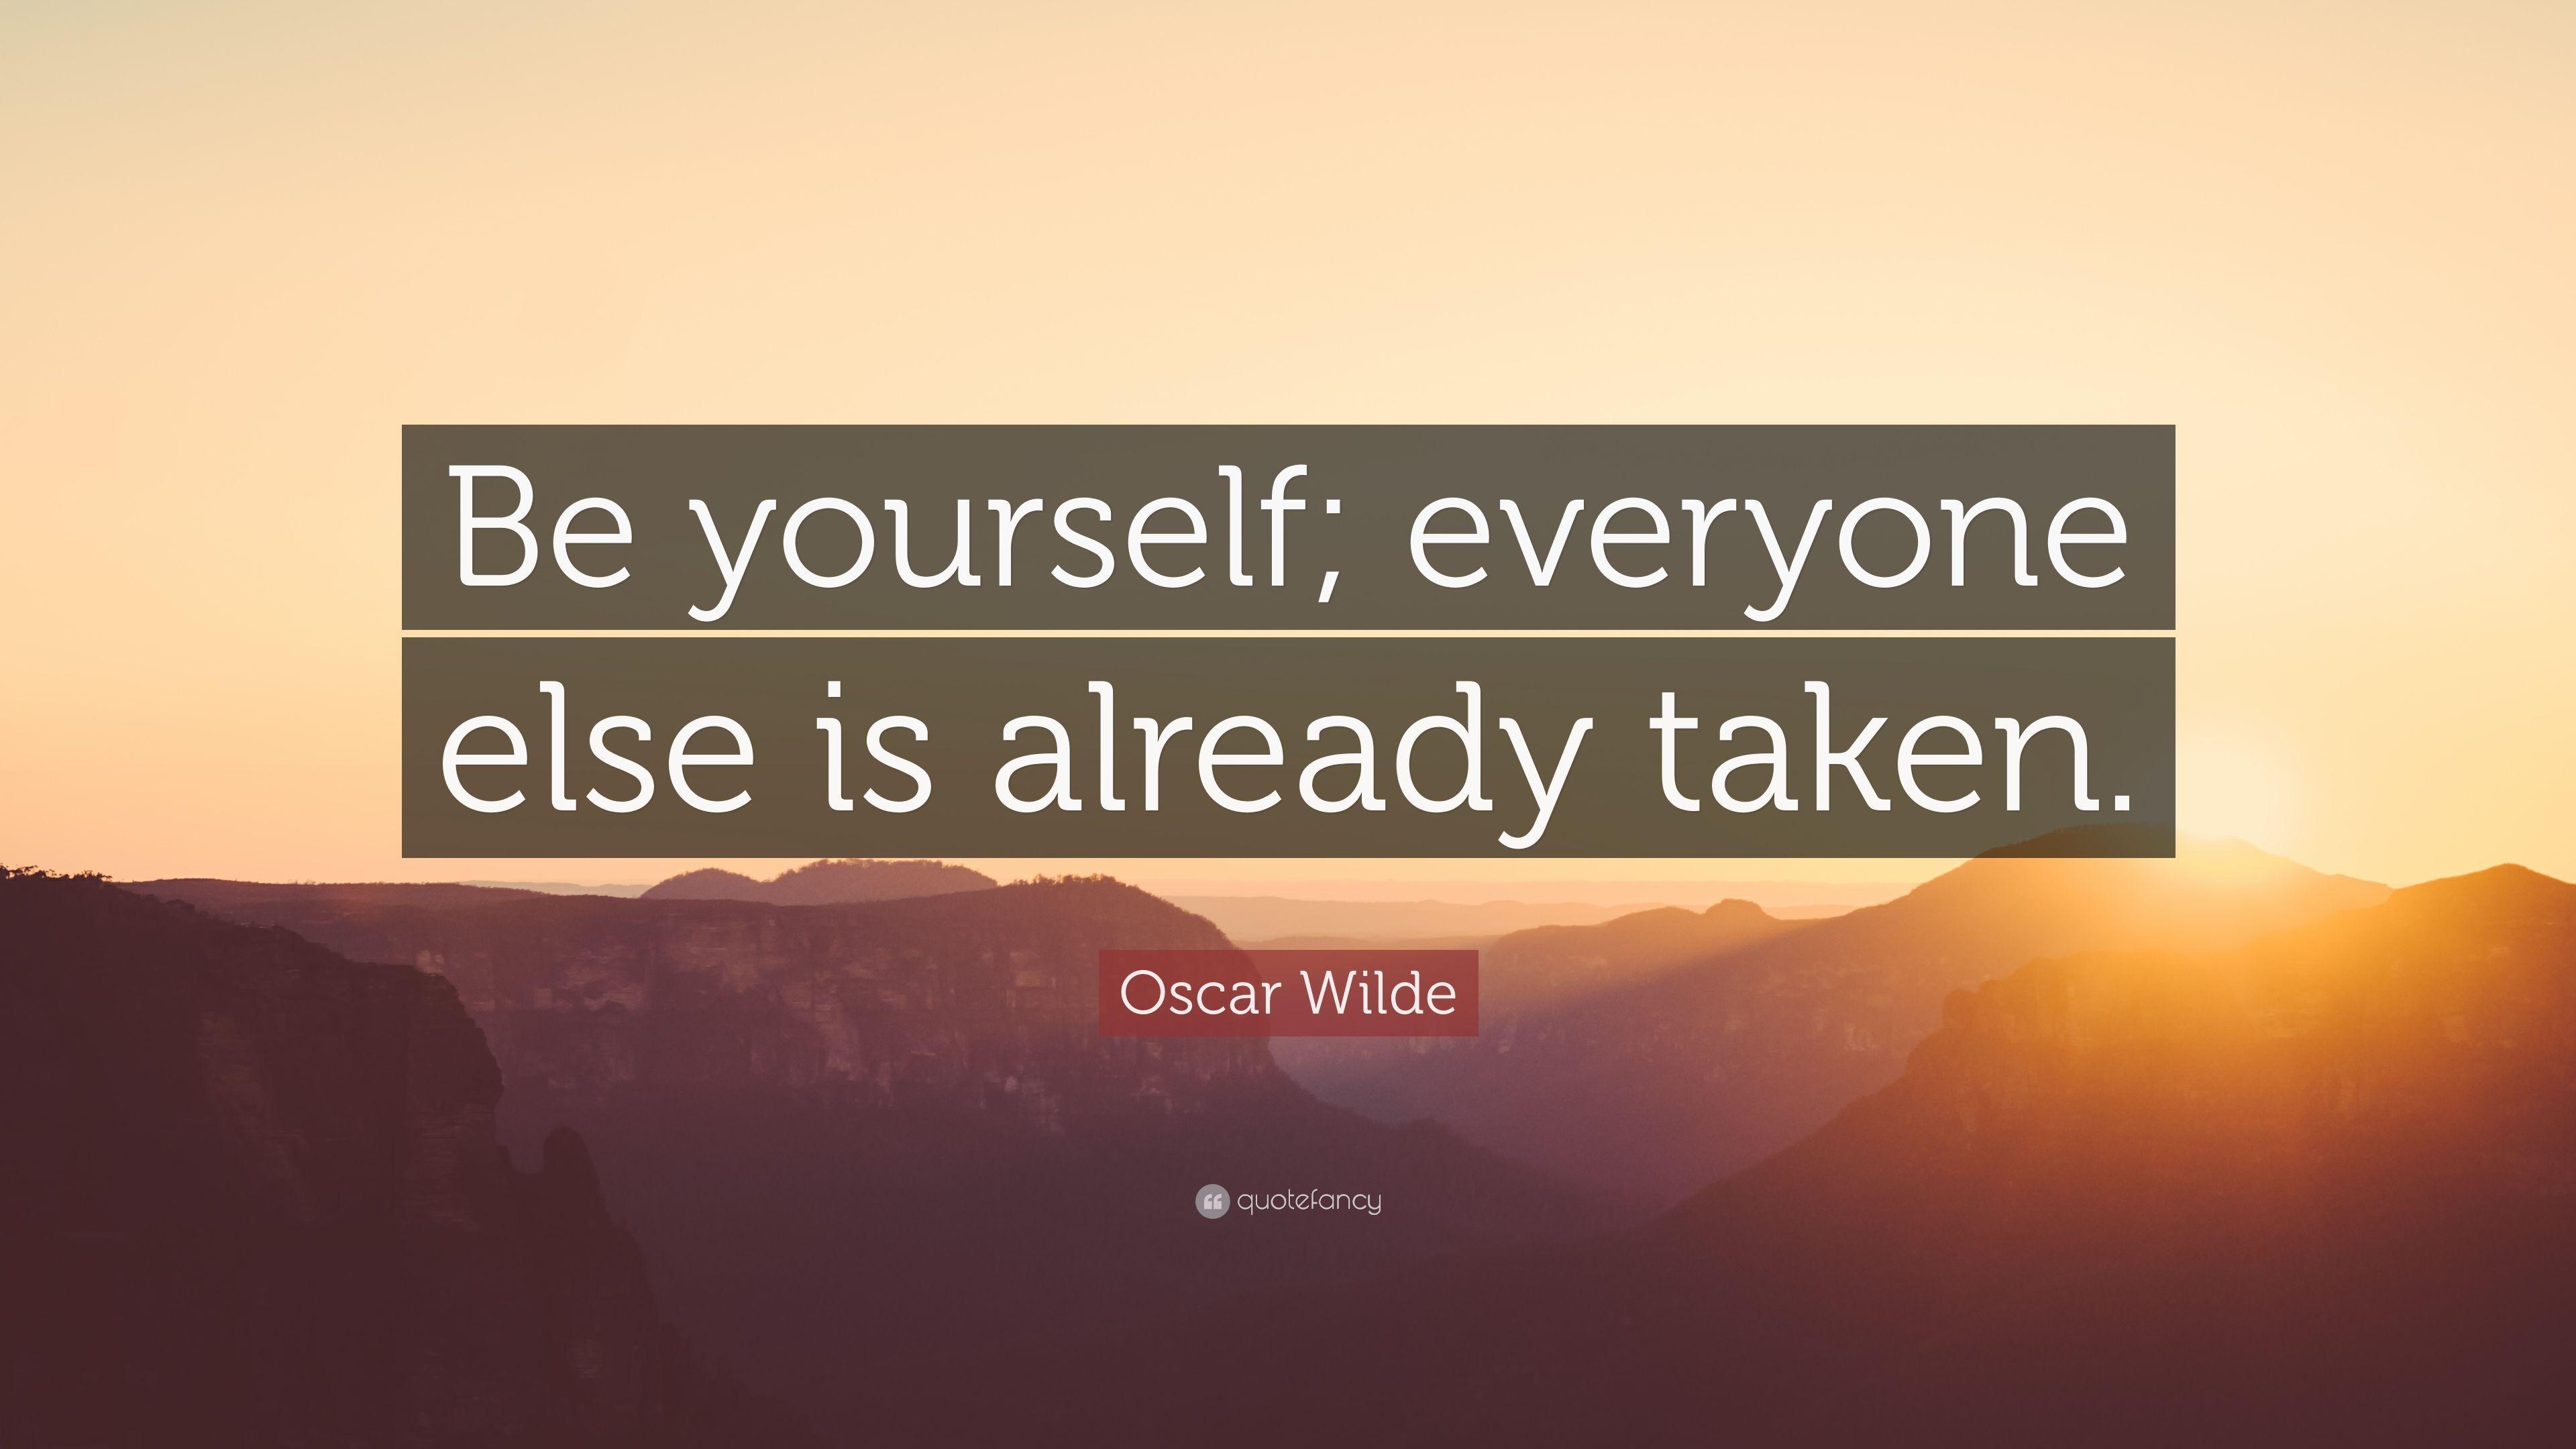 Oscar Wilde Quote: “Be yourself; everyone else is already taken